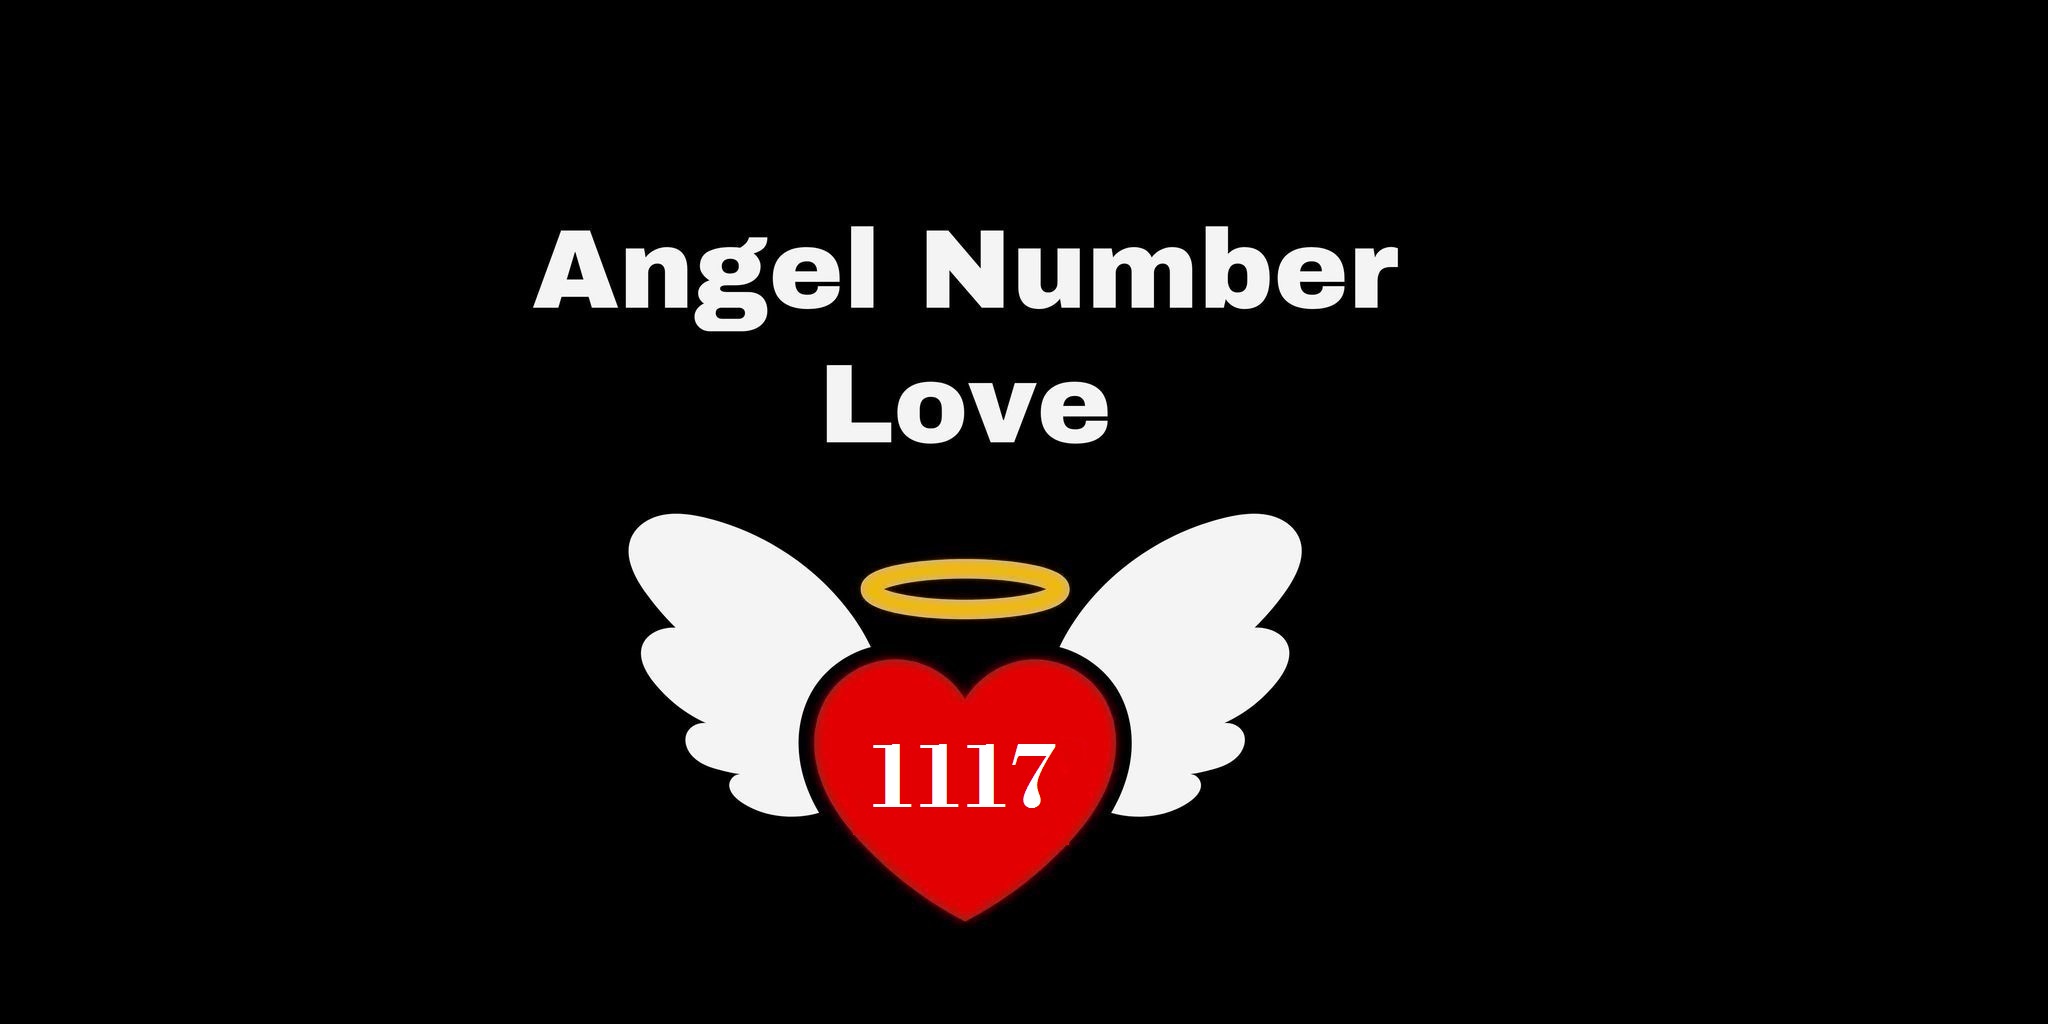 1117 Angel Number Meaning In Love